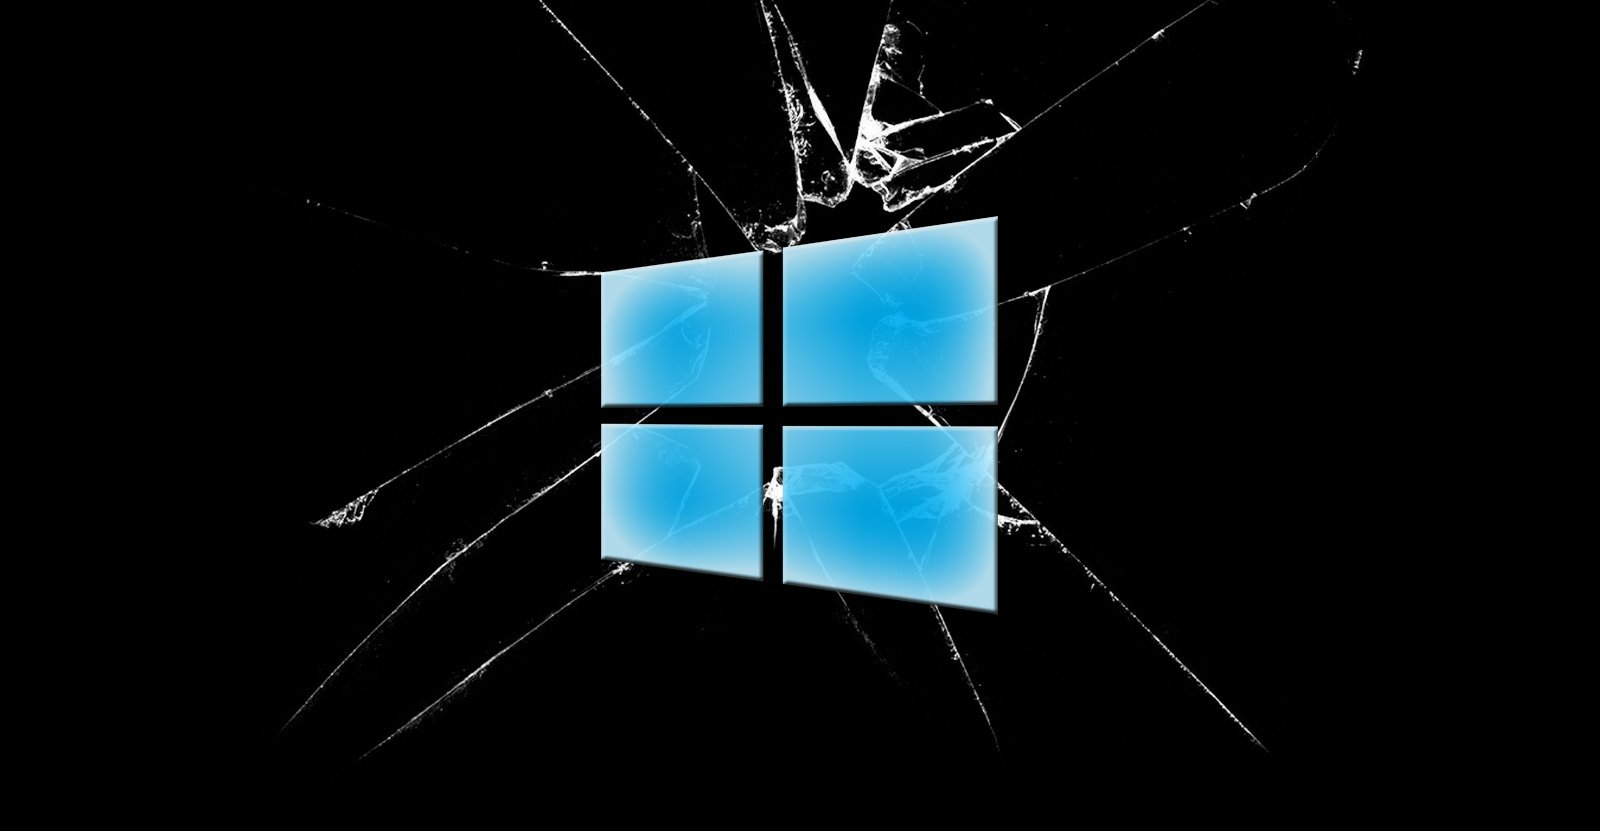 Microsoft: KB5021233 causes blue screens with 0xc000021a errors